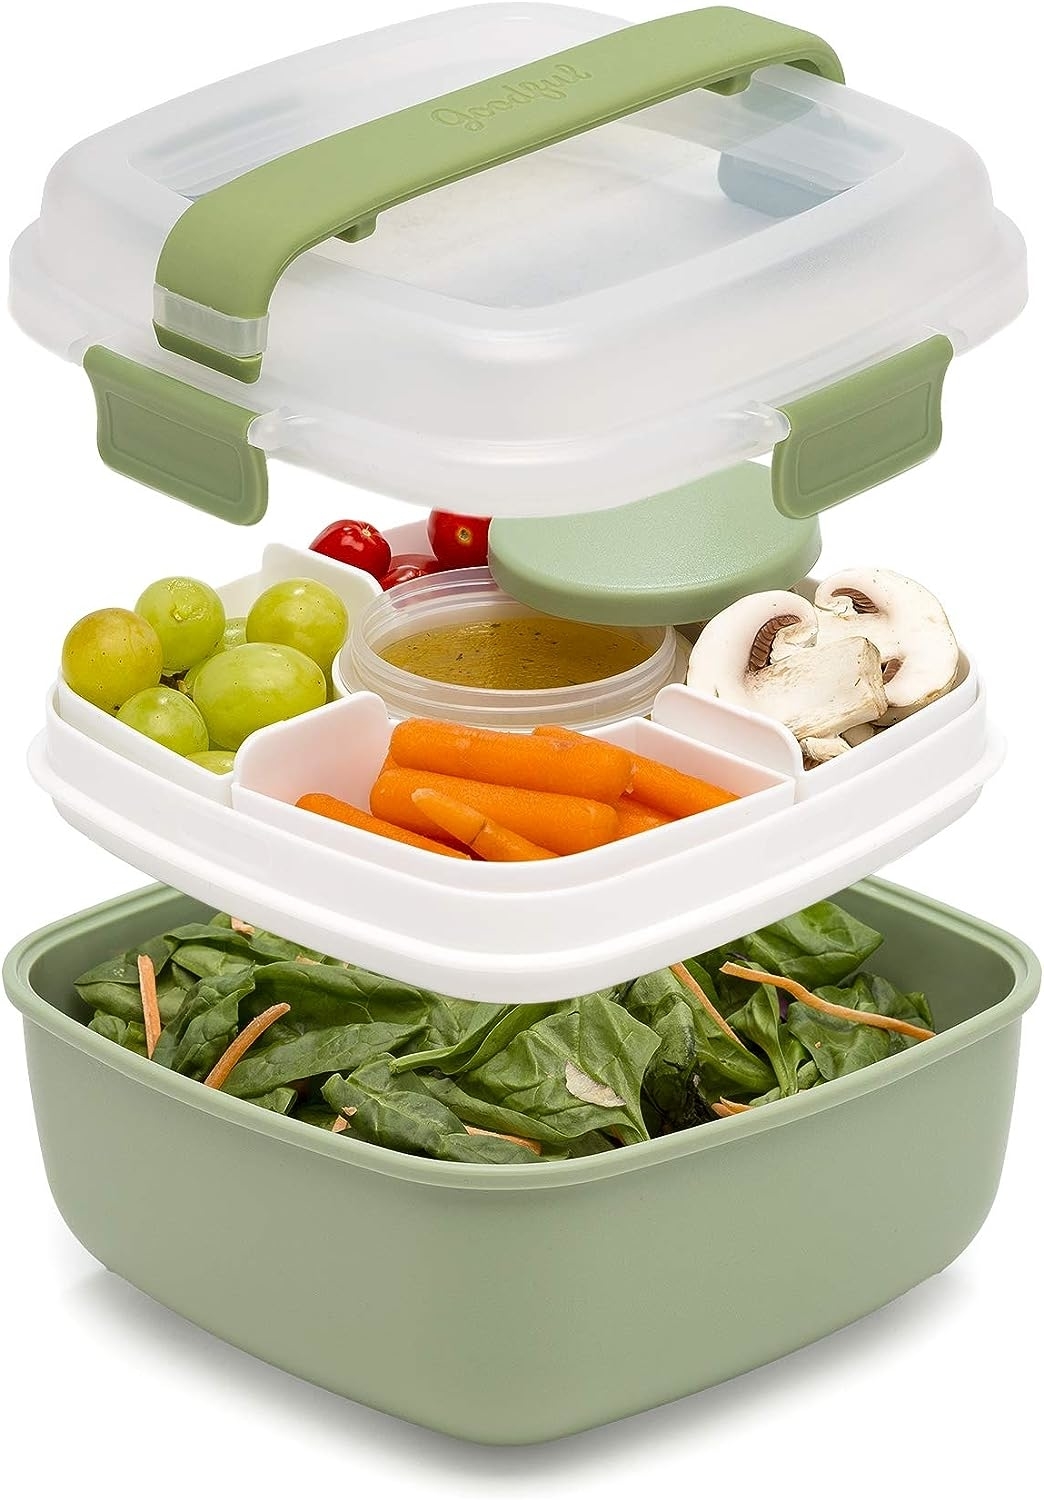 Goodful Bento box in green showing stackable functionality